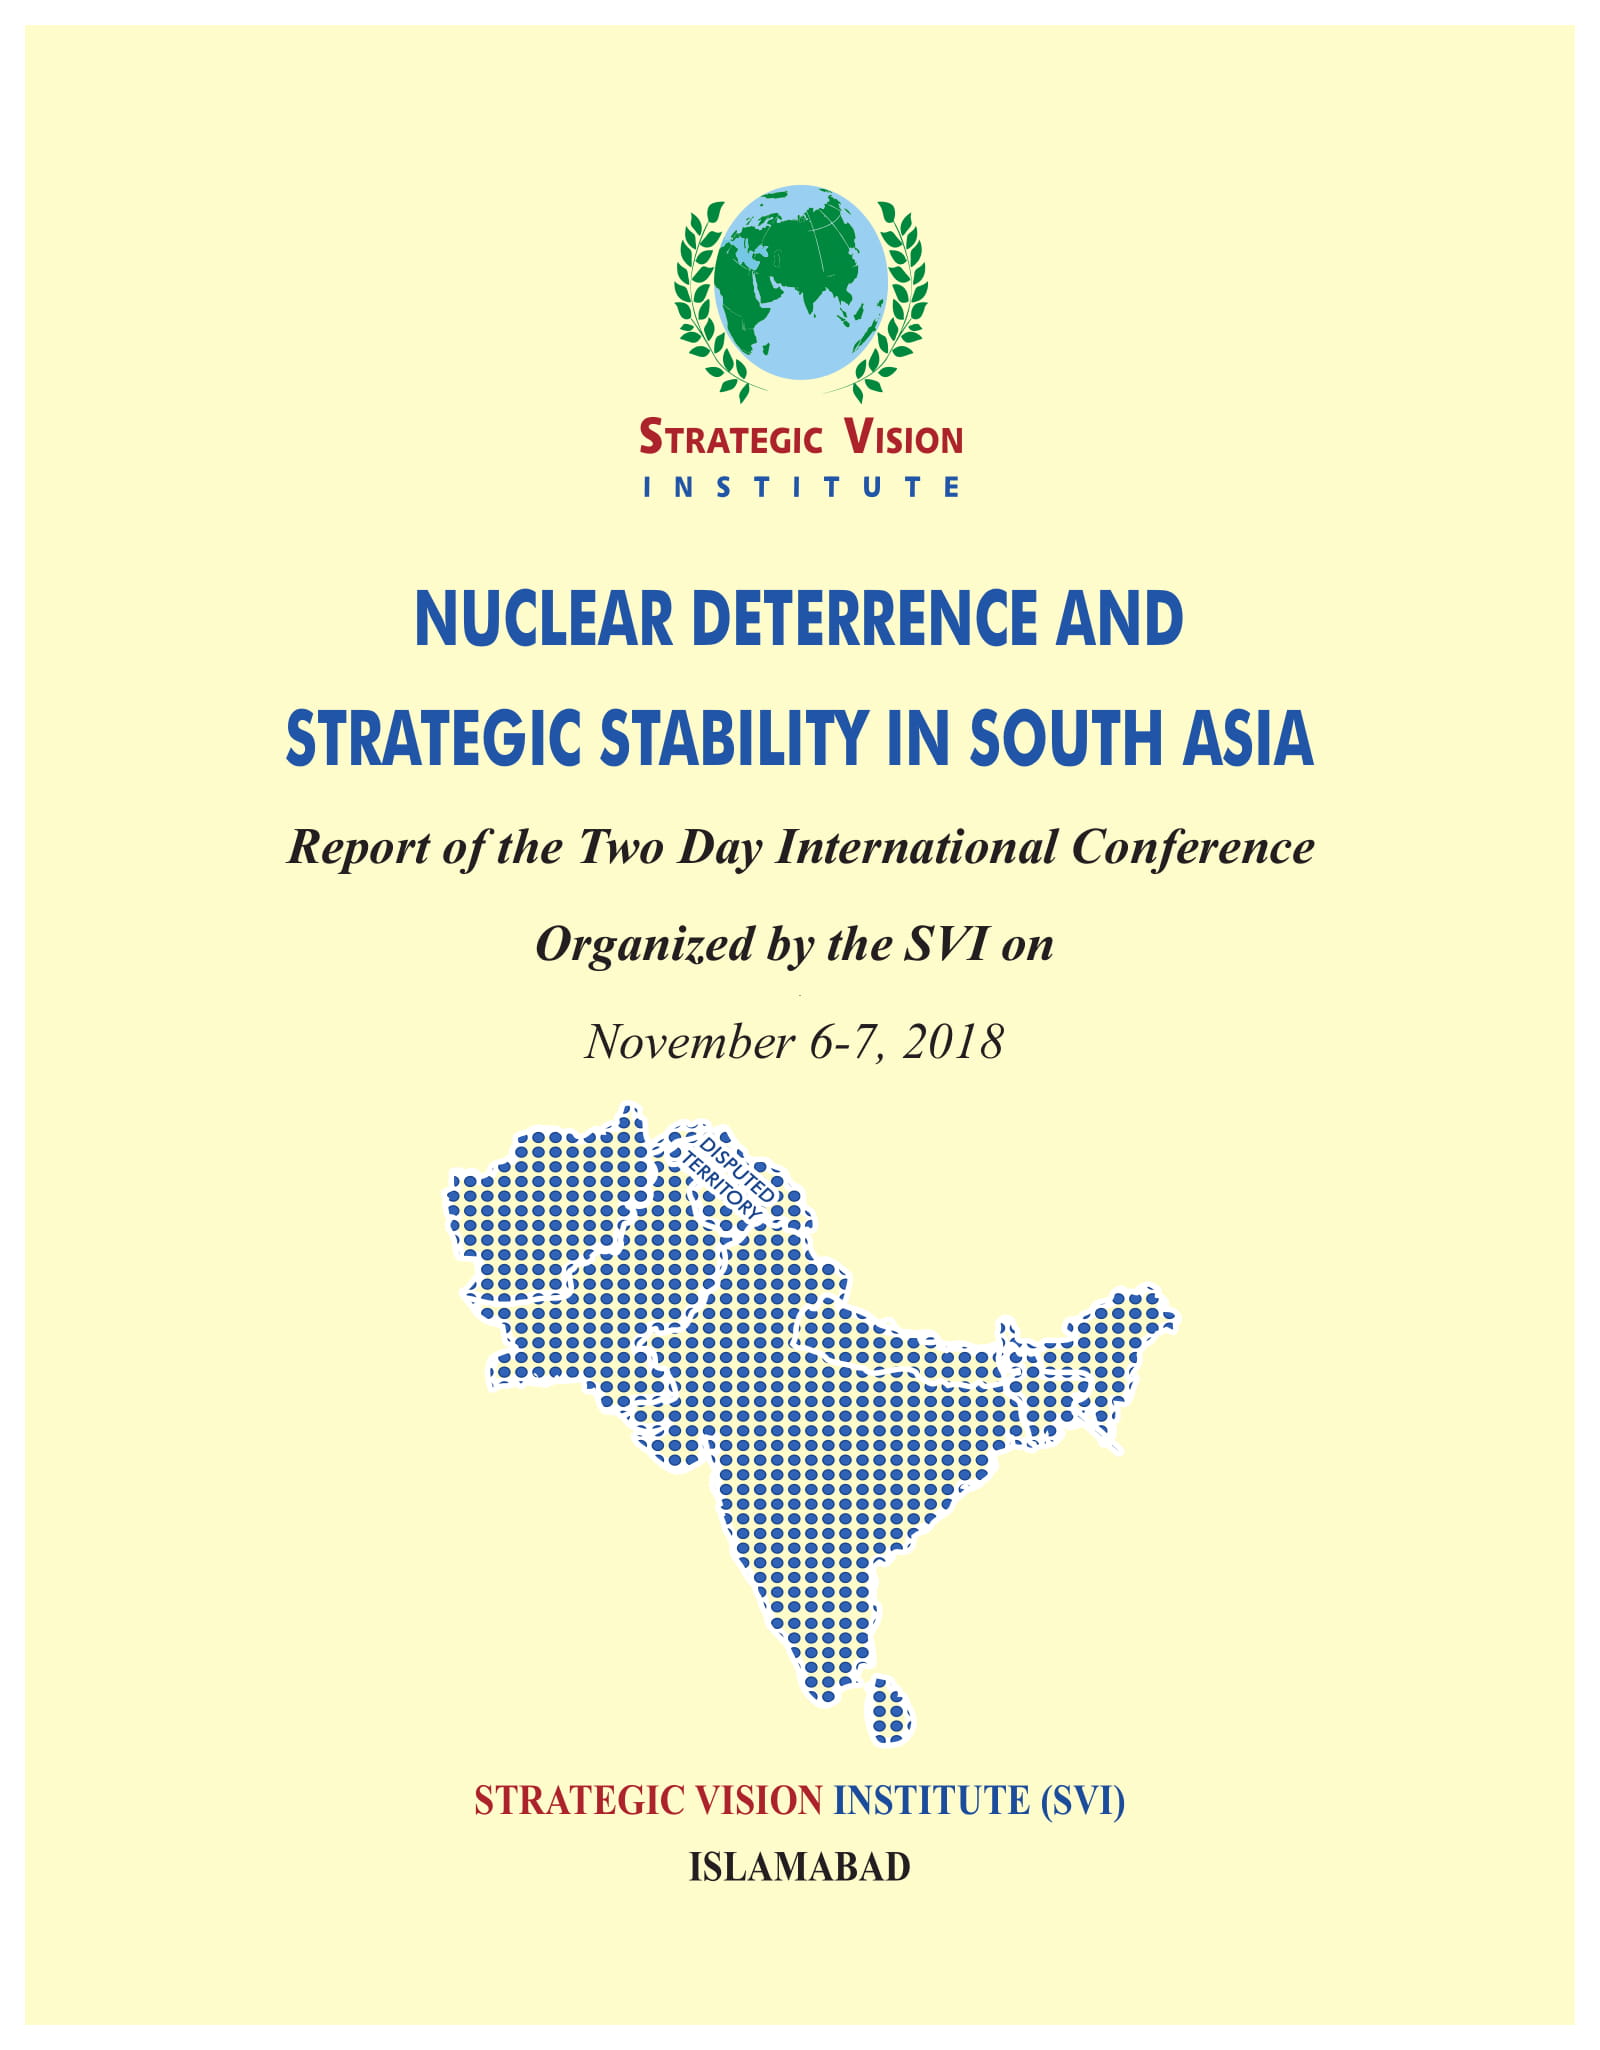 Two Days International Conference Report: Nuclear Deterrence and Strategic Stability in South Asia   Organized by the SVI on 6th-7th November 2018